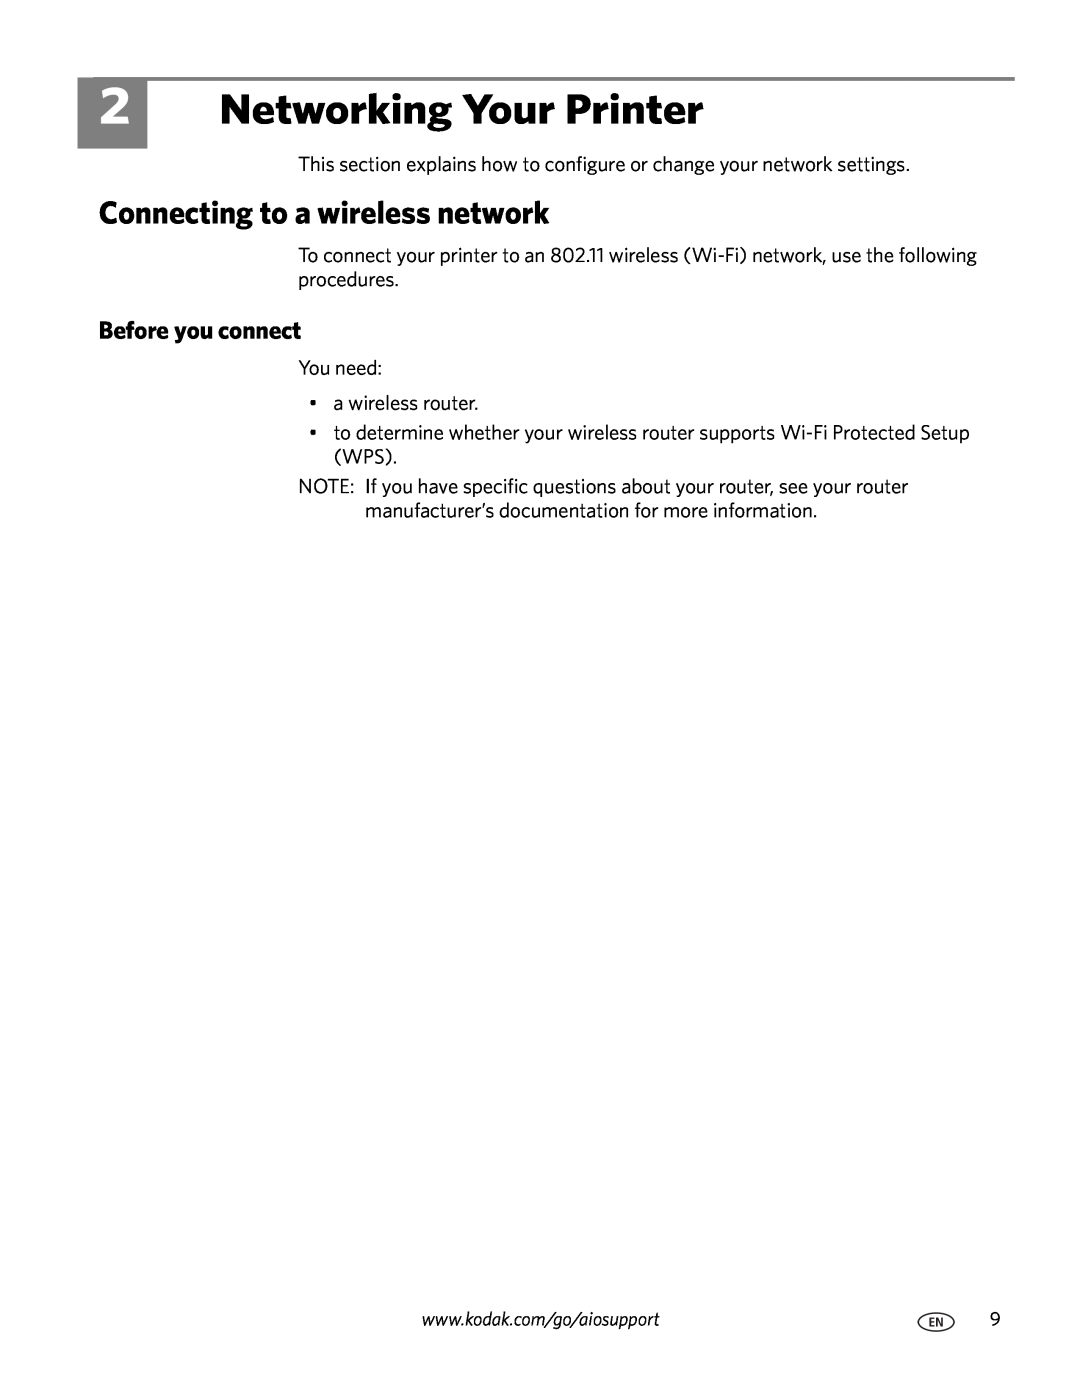 Kodak 7.1 manual Networking Your Printer, Connecting to a wireless network, Before you connect 